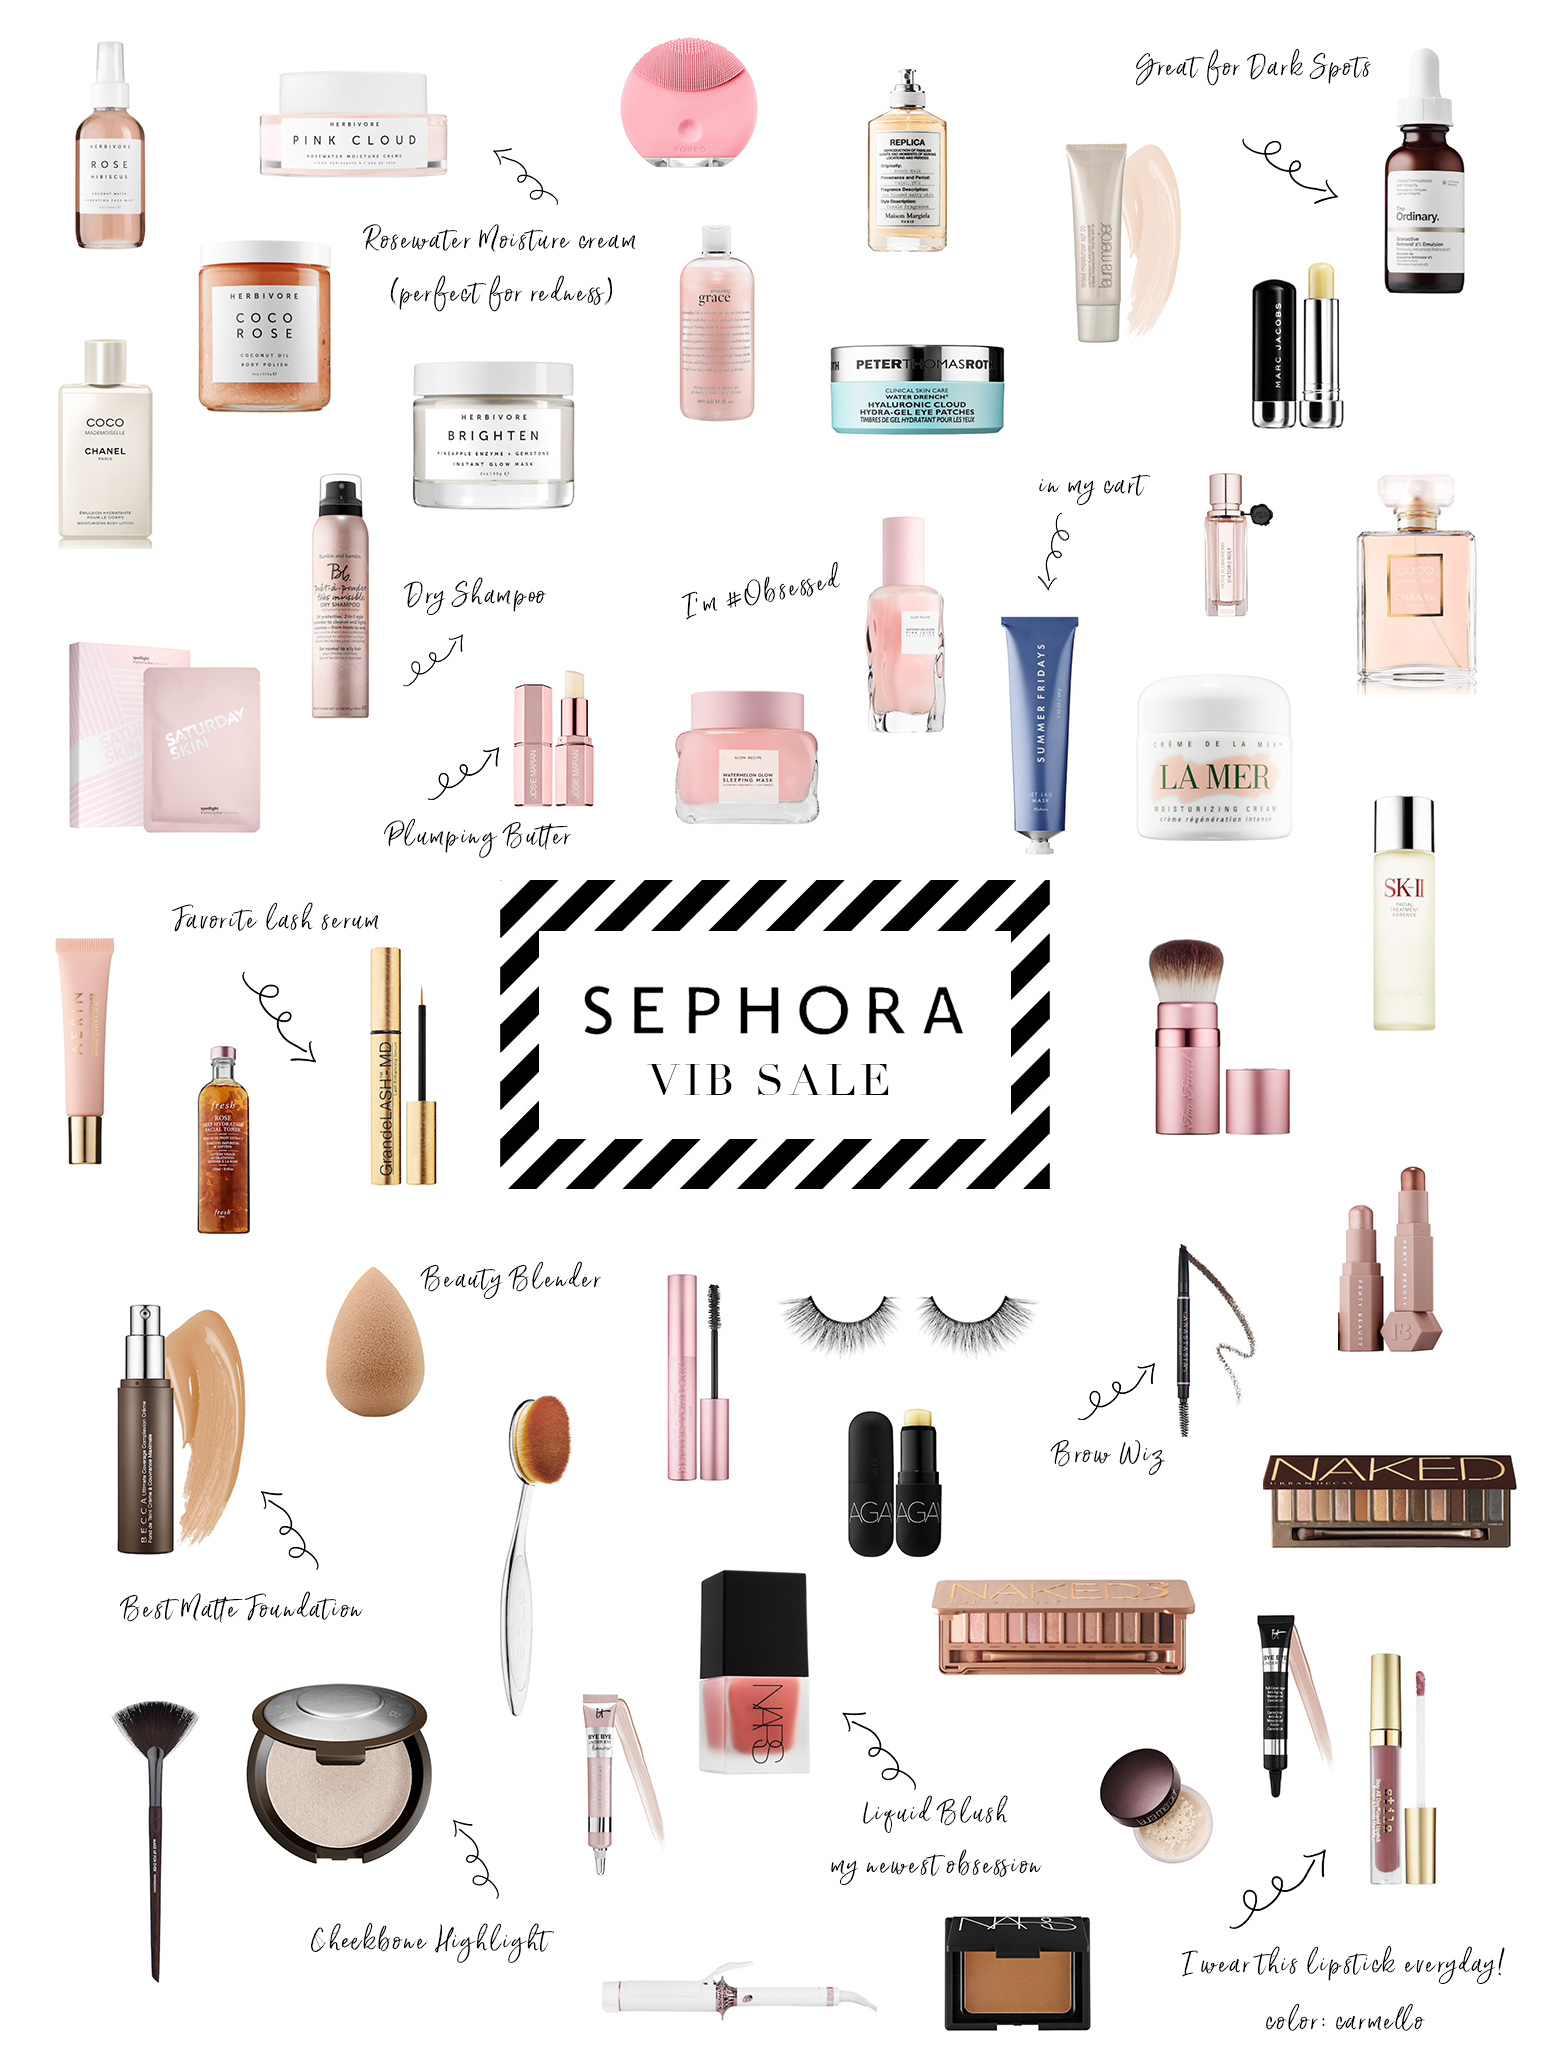 Sephora VIB Sale | Makeup | Best Skincare Products | Best Foundation | Blondie in the City favorites